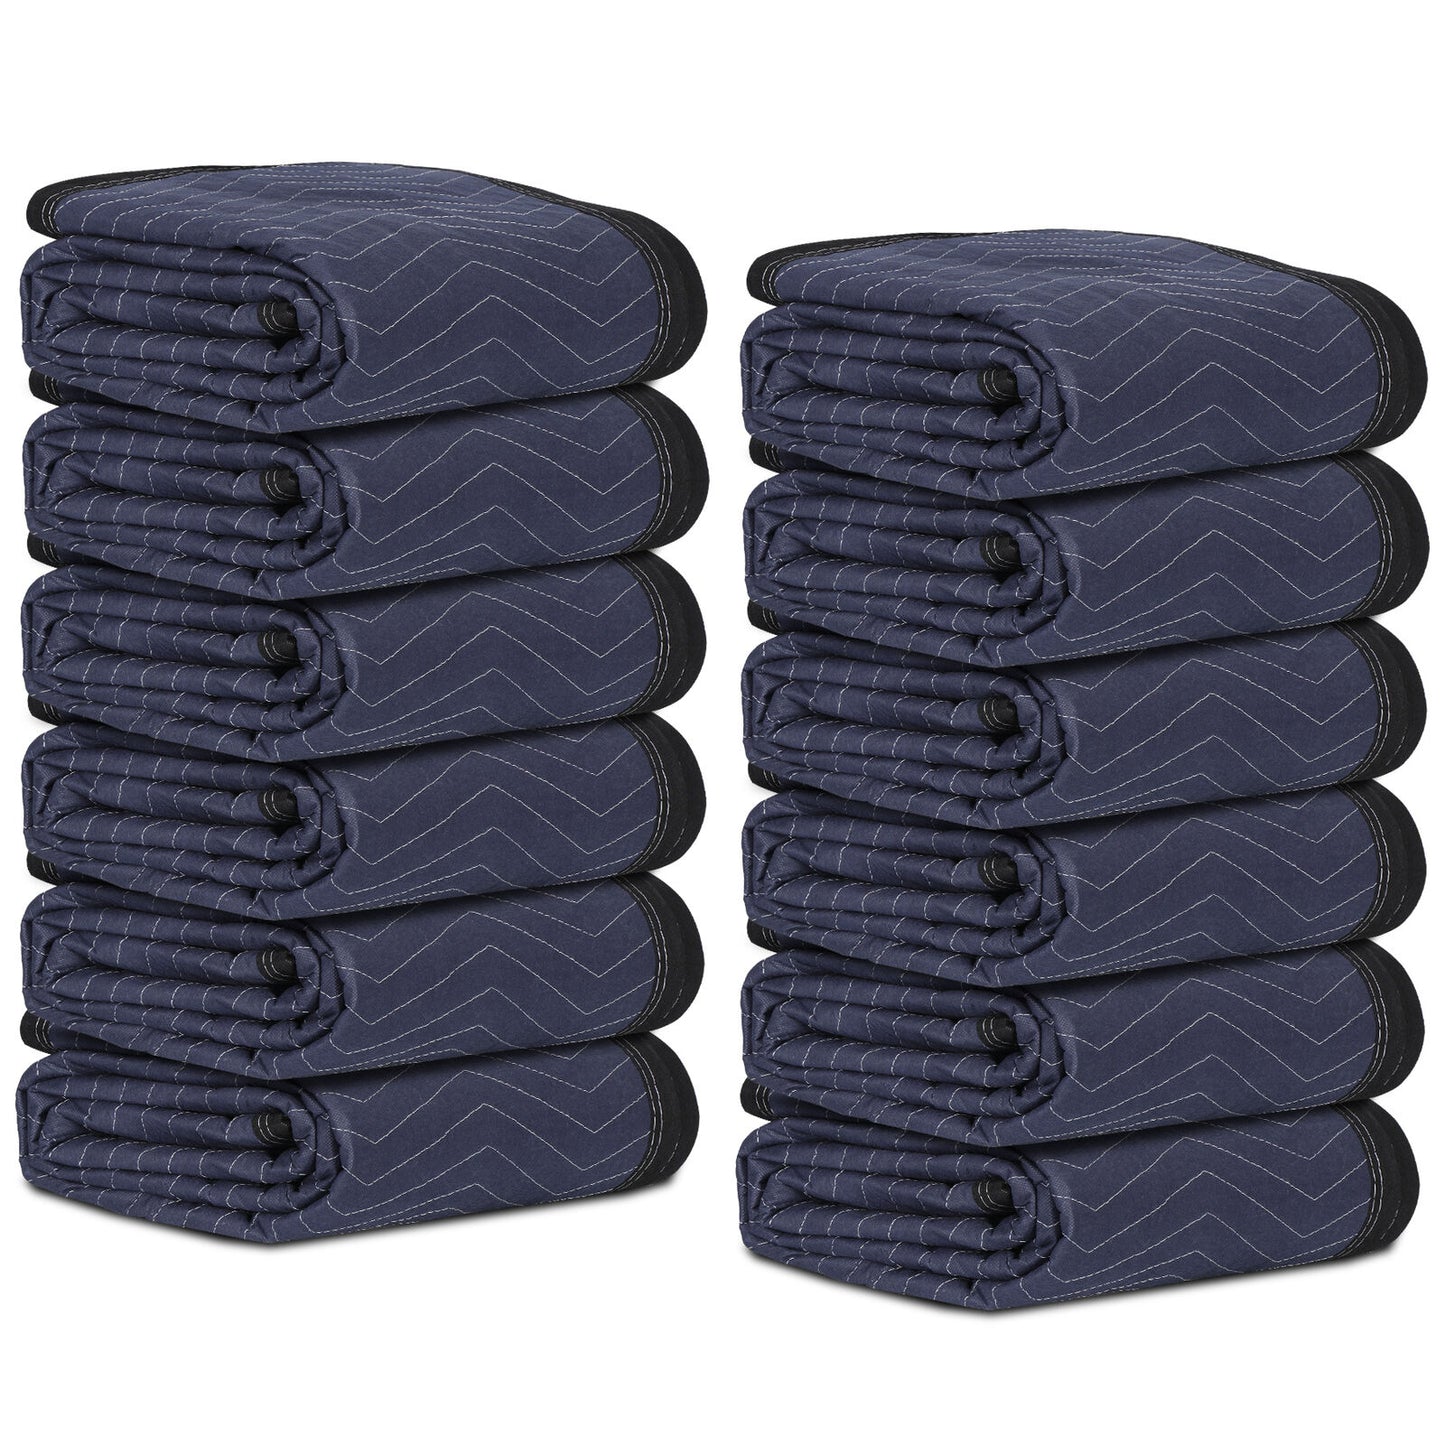 80"x72" Furniture 12 Moving Blankets Protective Shipping Packing Pads Blue/Black